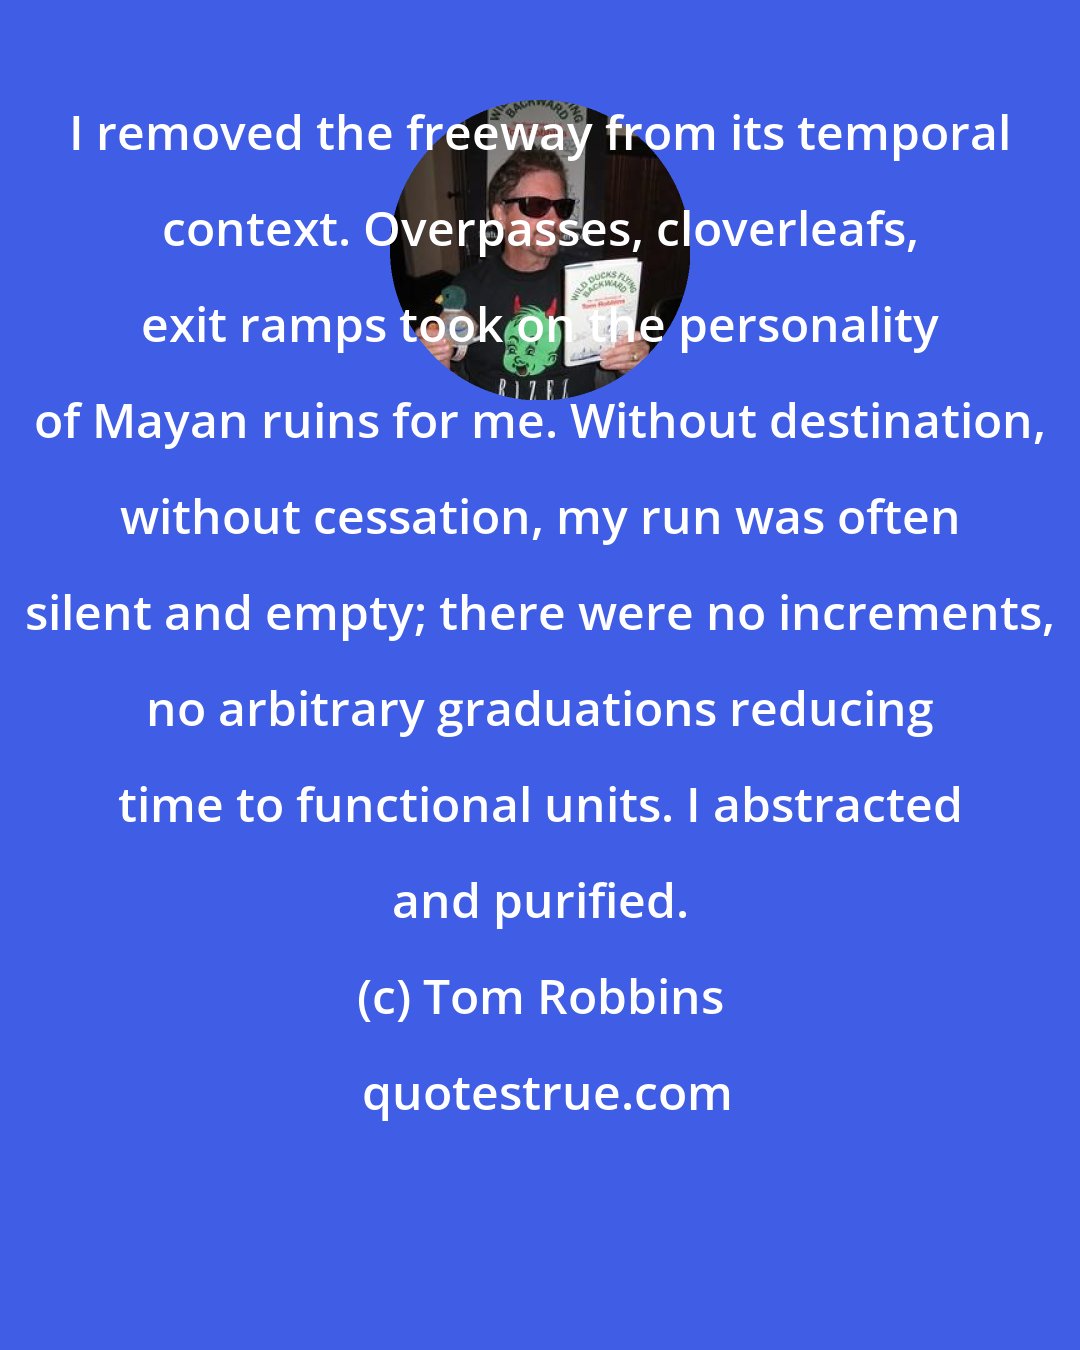 Tom Robbins: I removed the freeway from its temporal context. Overpasses, cloverleafs, exit ramps took on the personality of Mayan ruins for me. Without destination, without cessation, my run was often silent and empty; there were no increments, no arbitrary graduations reducing time to functional units. I abstracted and purified.